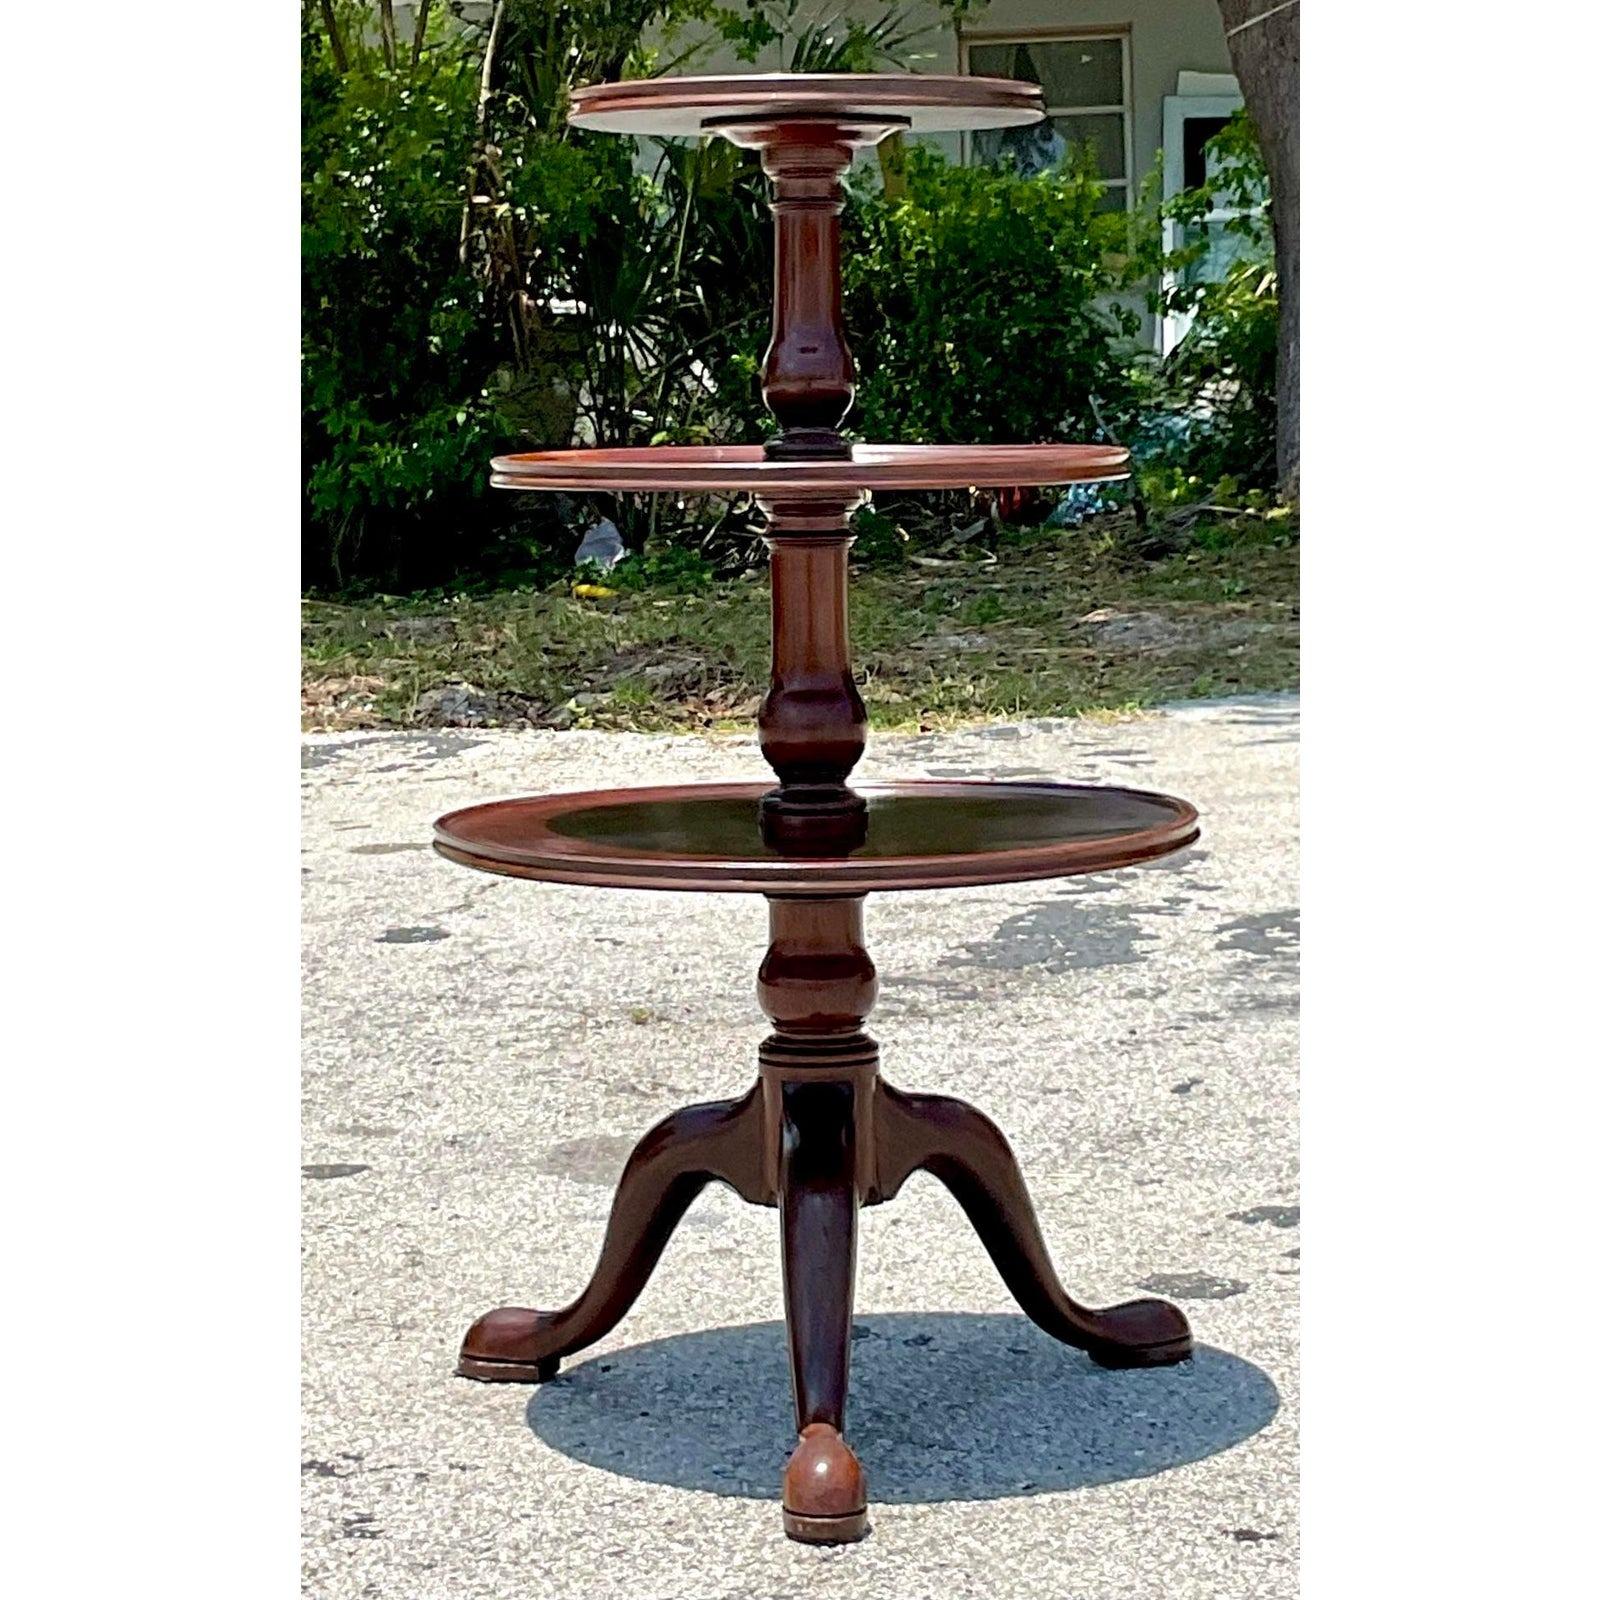 A gorgeous vintage George III style mahogany dumbwaiter with central baluster and three shelves, each with fluted piecrust edges, resting on a tripod of Queen Anne pad feet. Acquired at a Palm Beach estate.